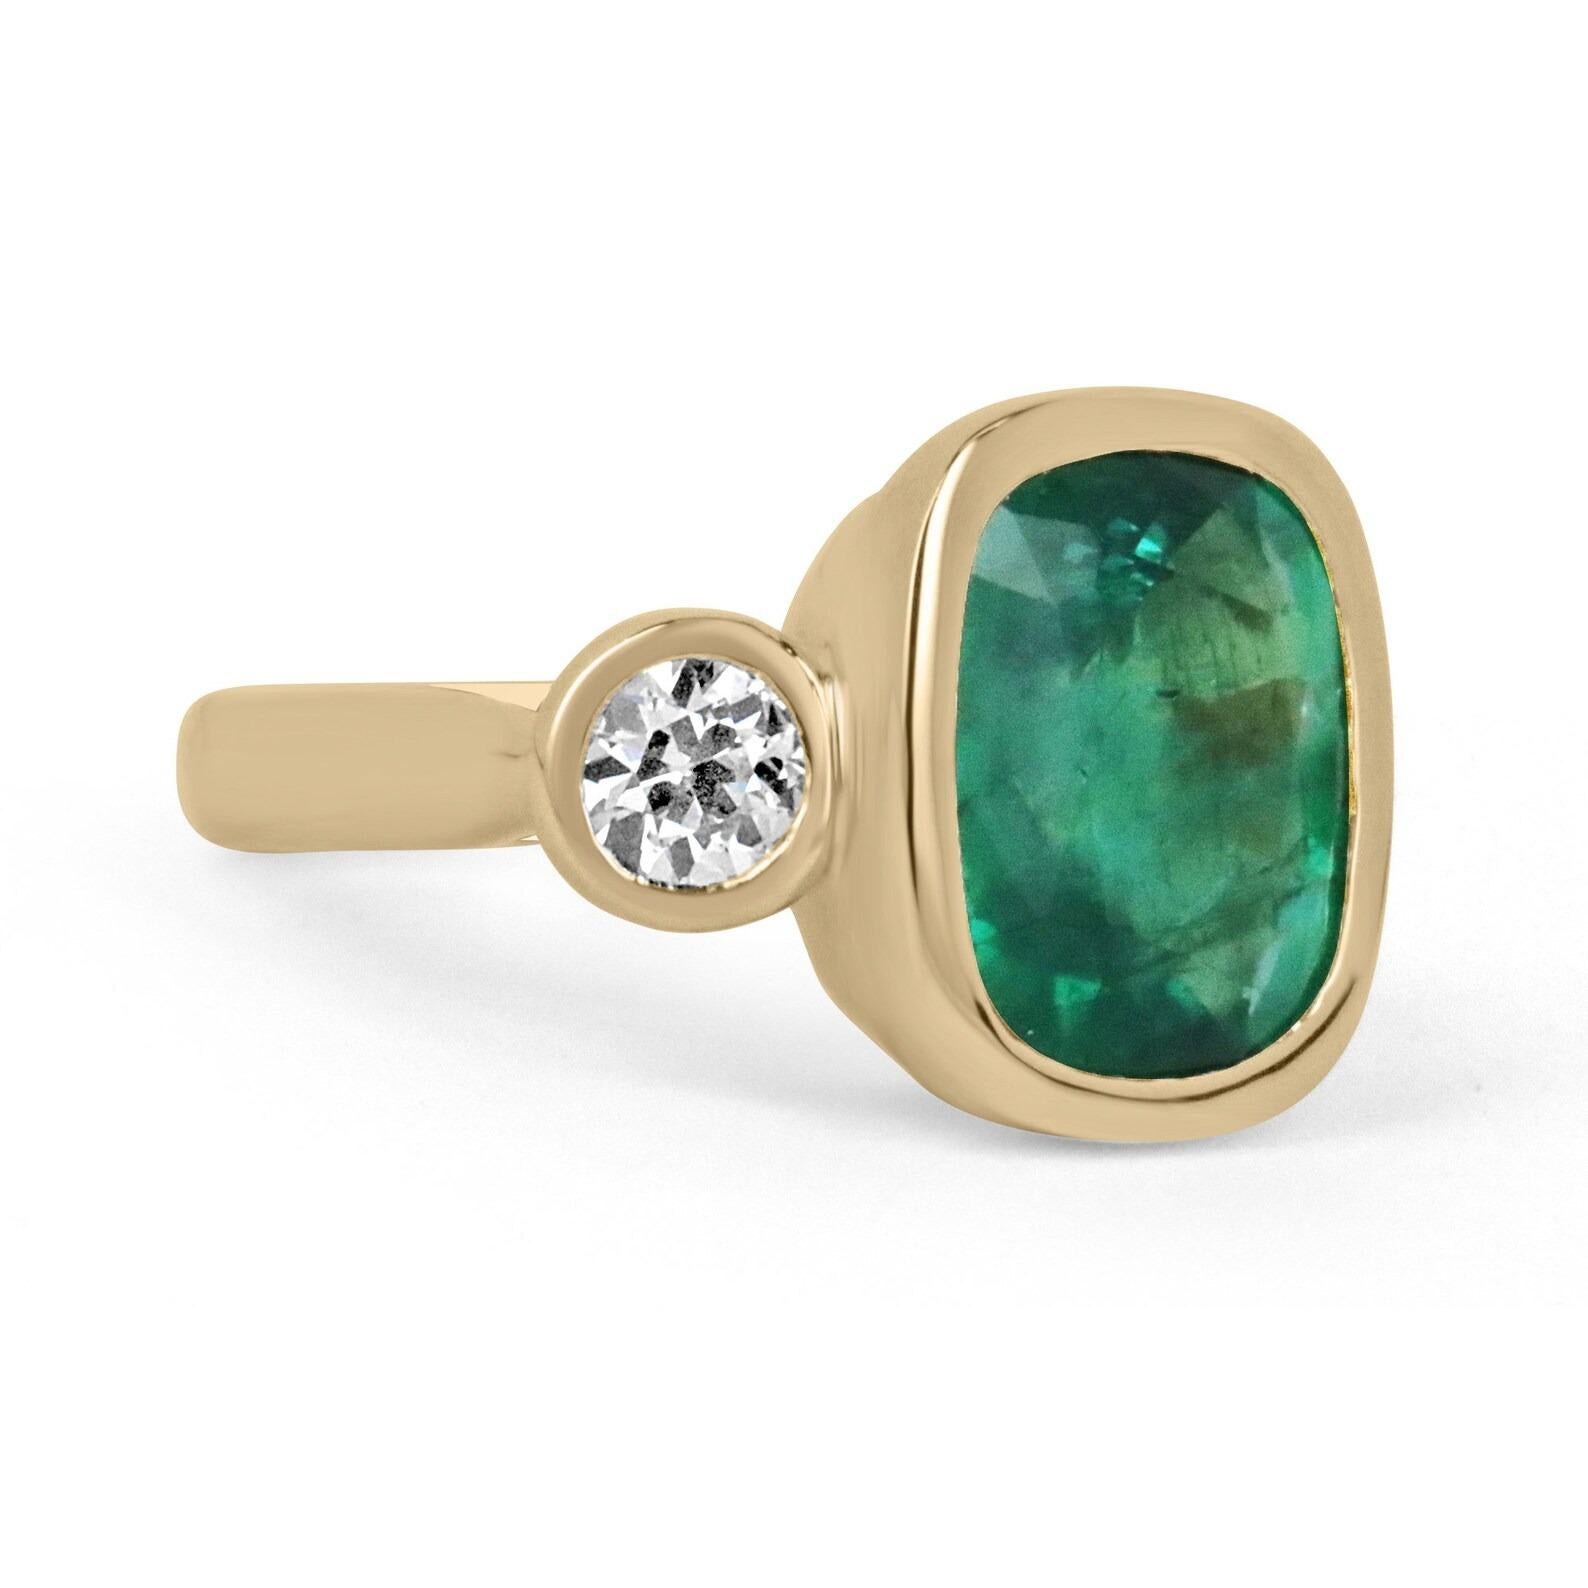 Make a statement with this remarkable emerald and diamond three-stone ring. The center stone features an exquisite AAA rare top 7.22-carat, natural cushion cut emerald from the origins of Zambia. This divine stone is a rare treasure due to its